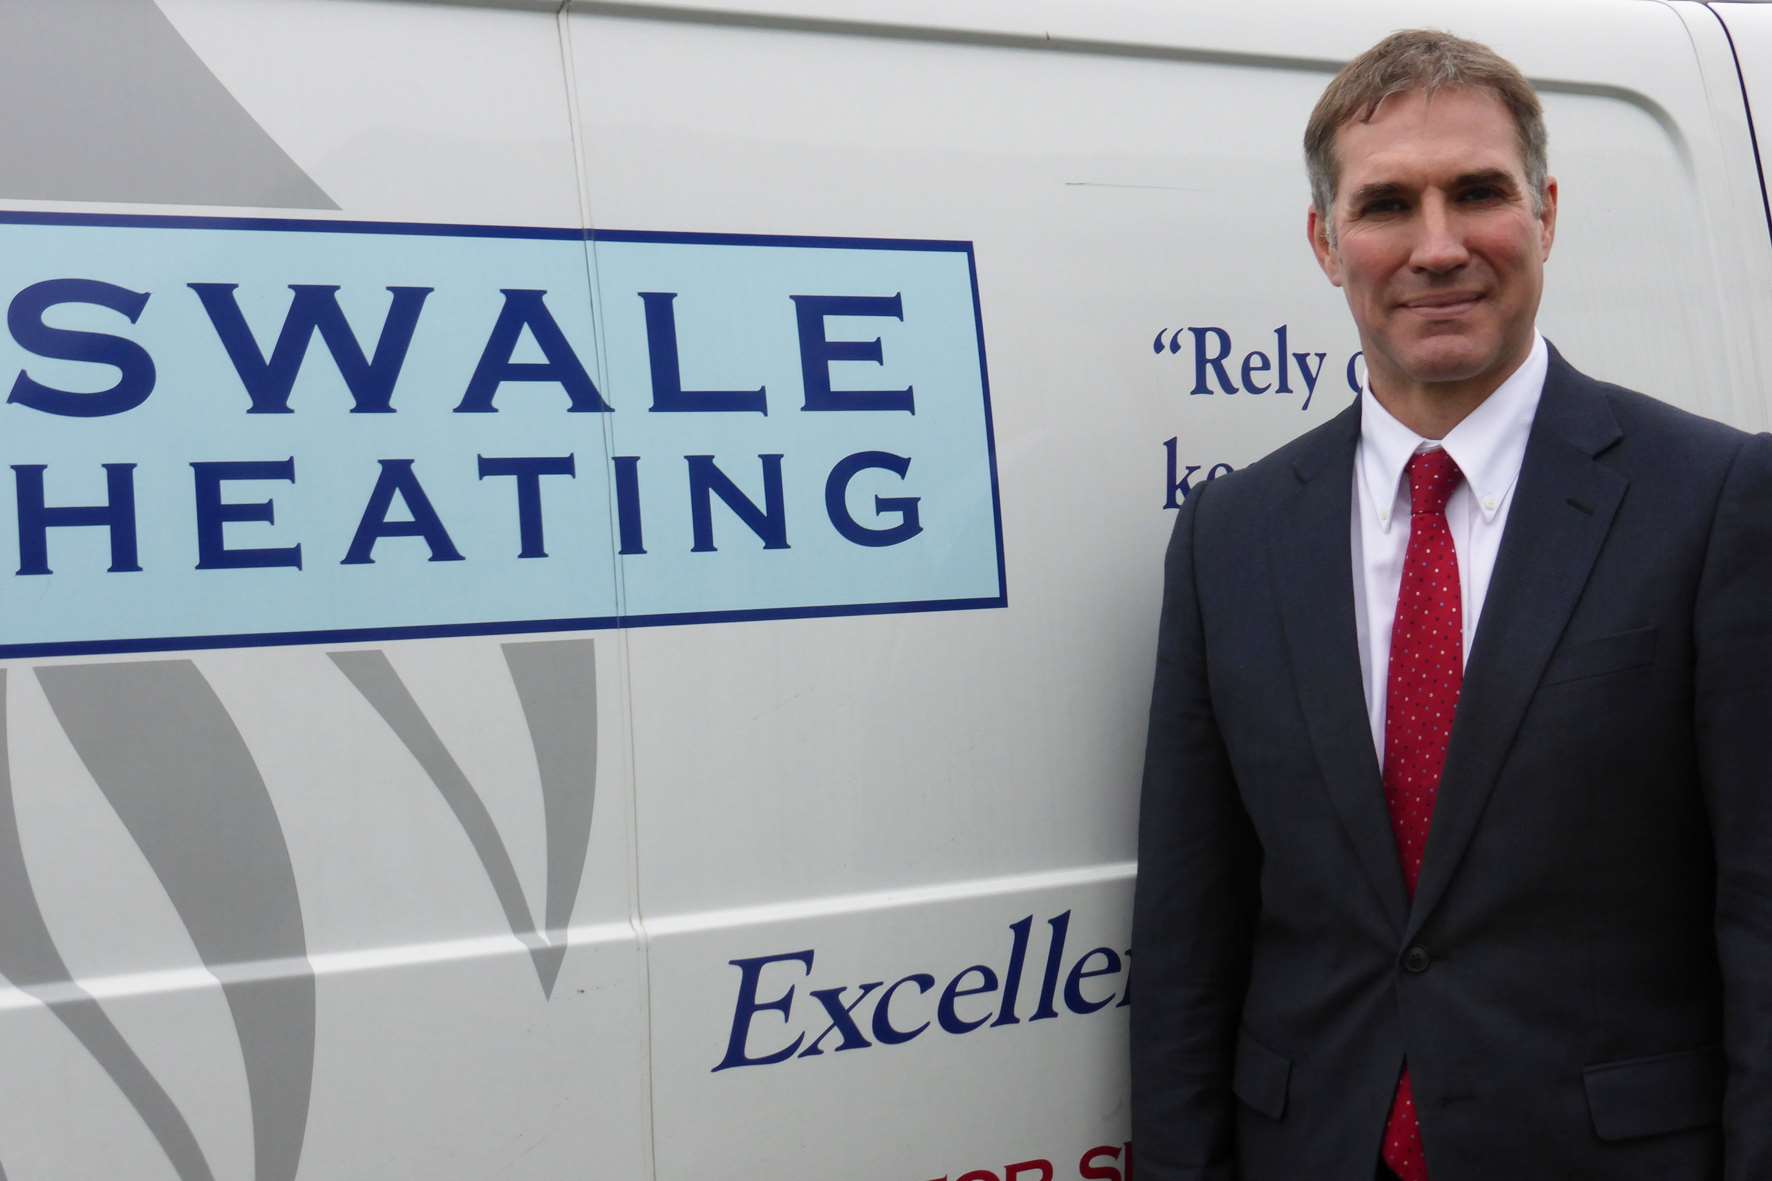 David Mathieson is the new managing director at Swale Heating